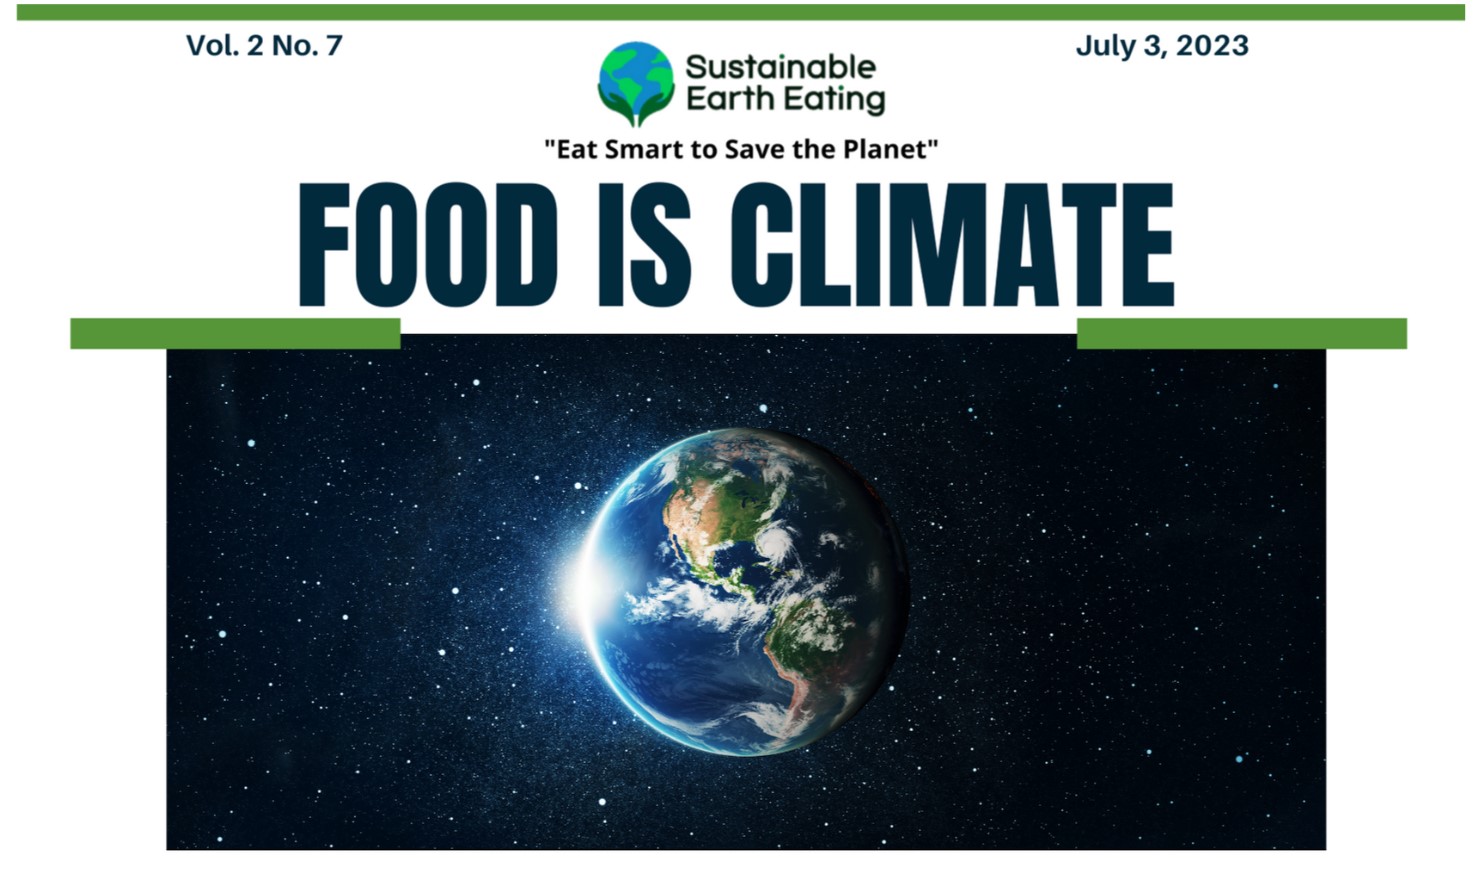 Food is climate